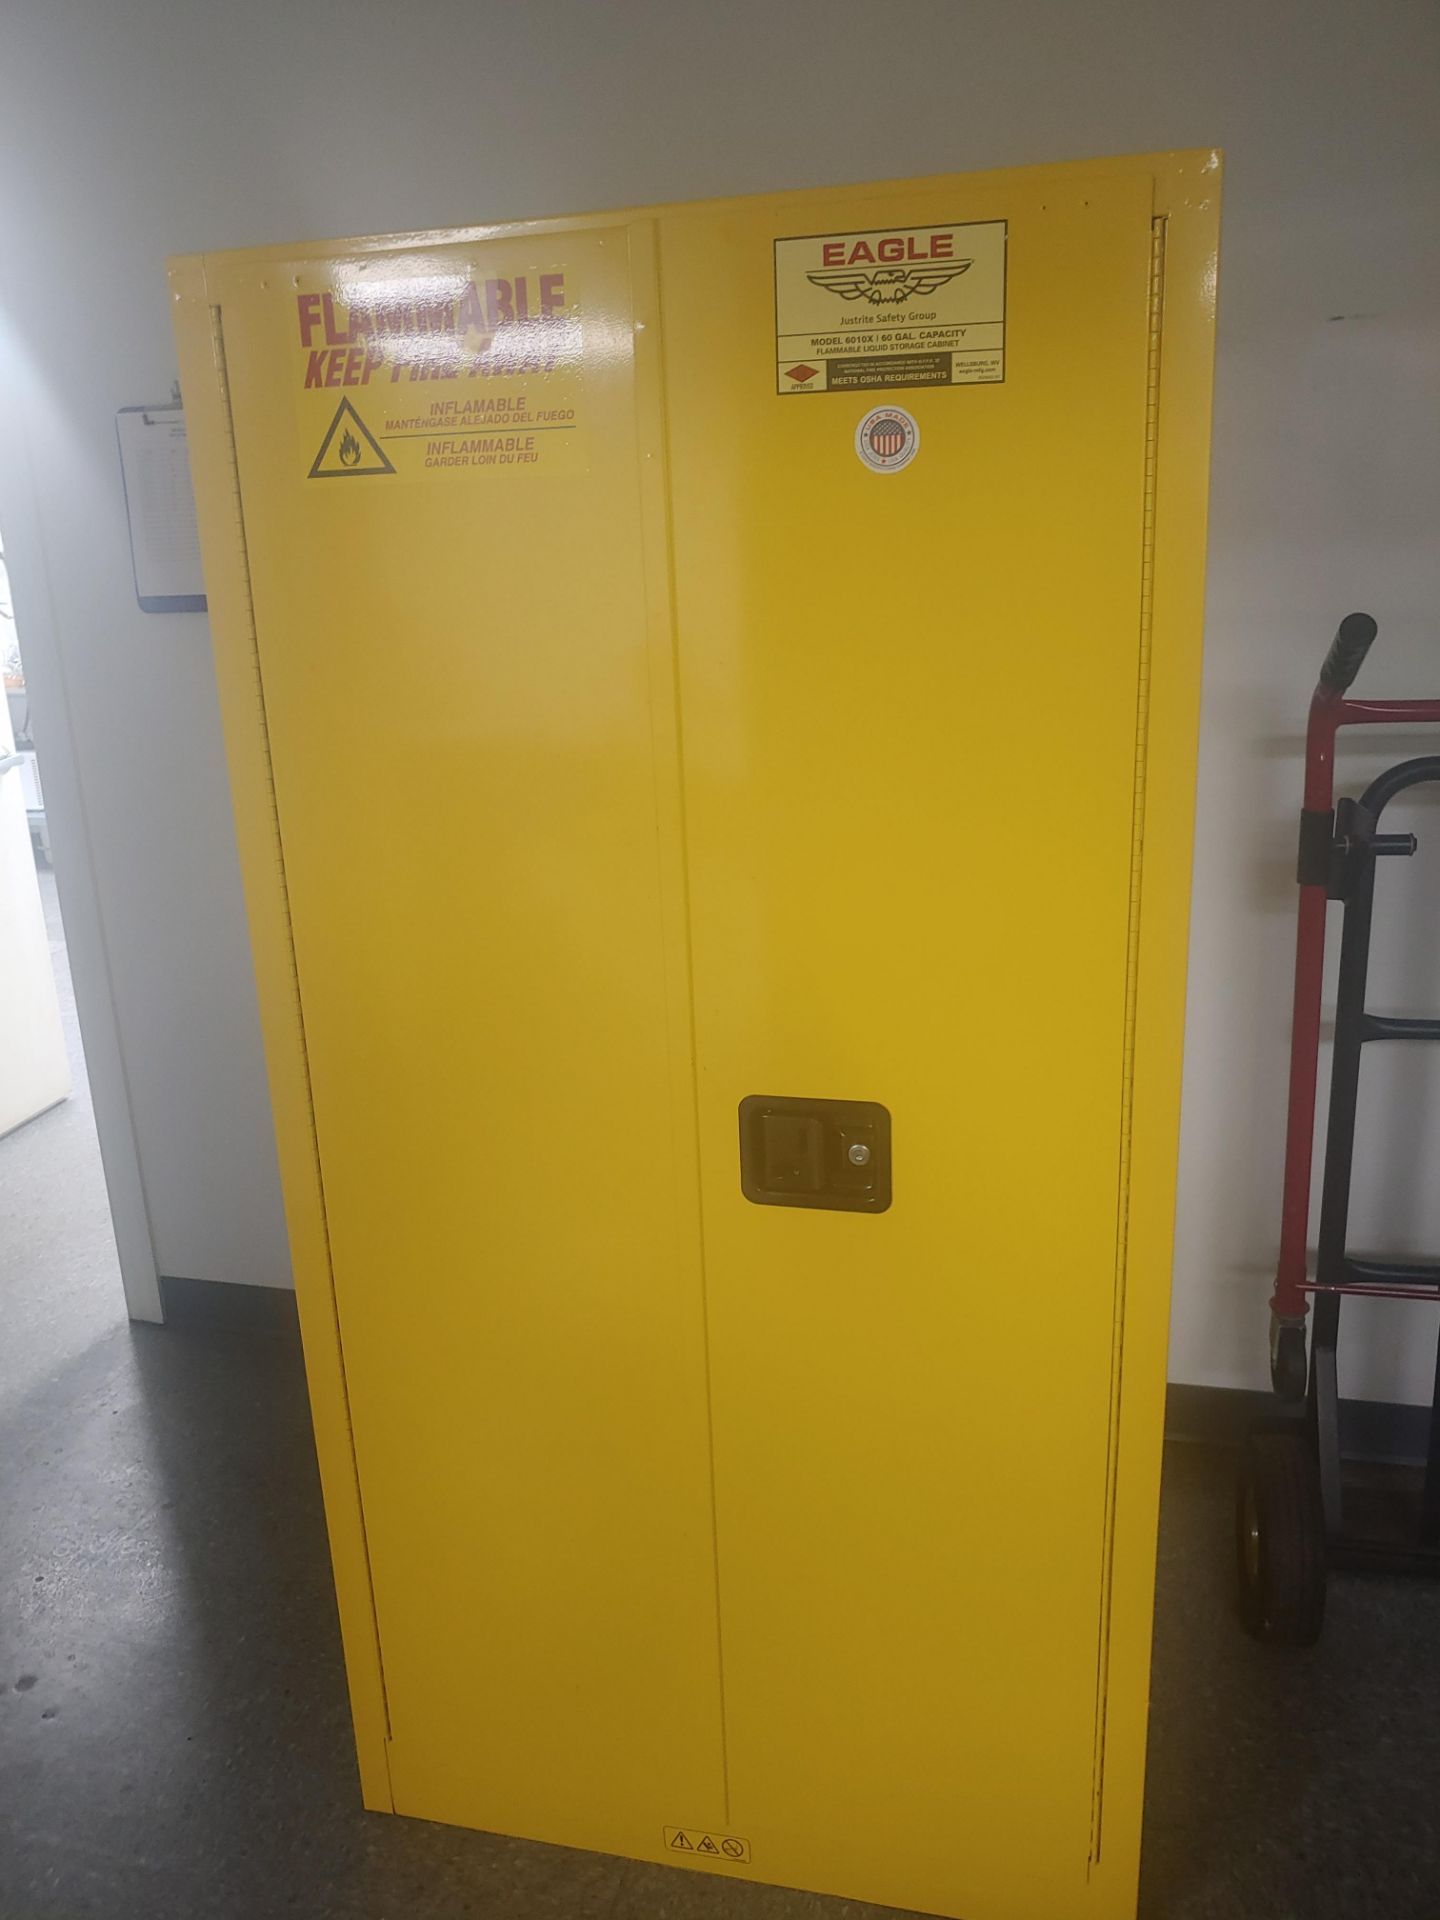 Flammable Storage Cabinet, Sayre, PA